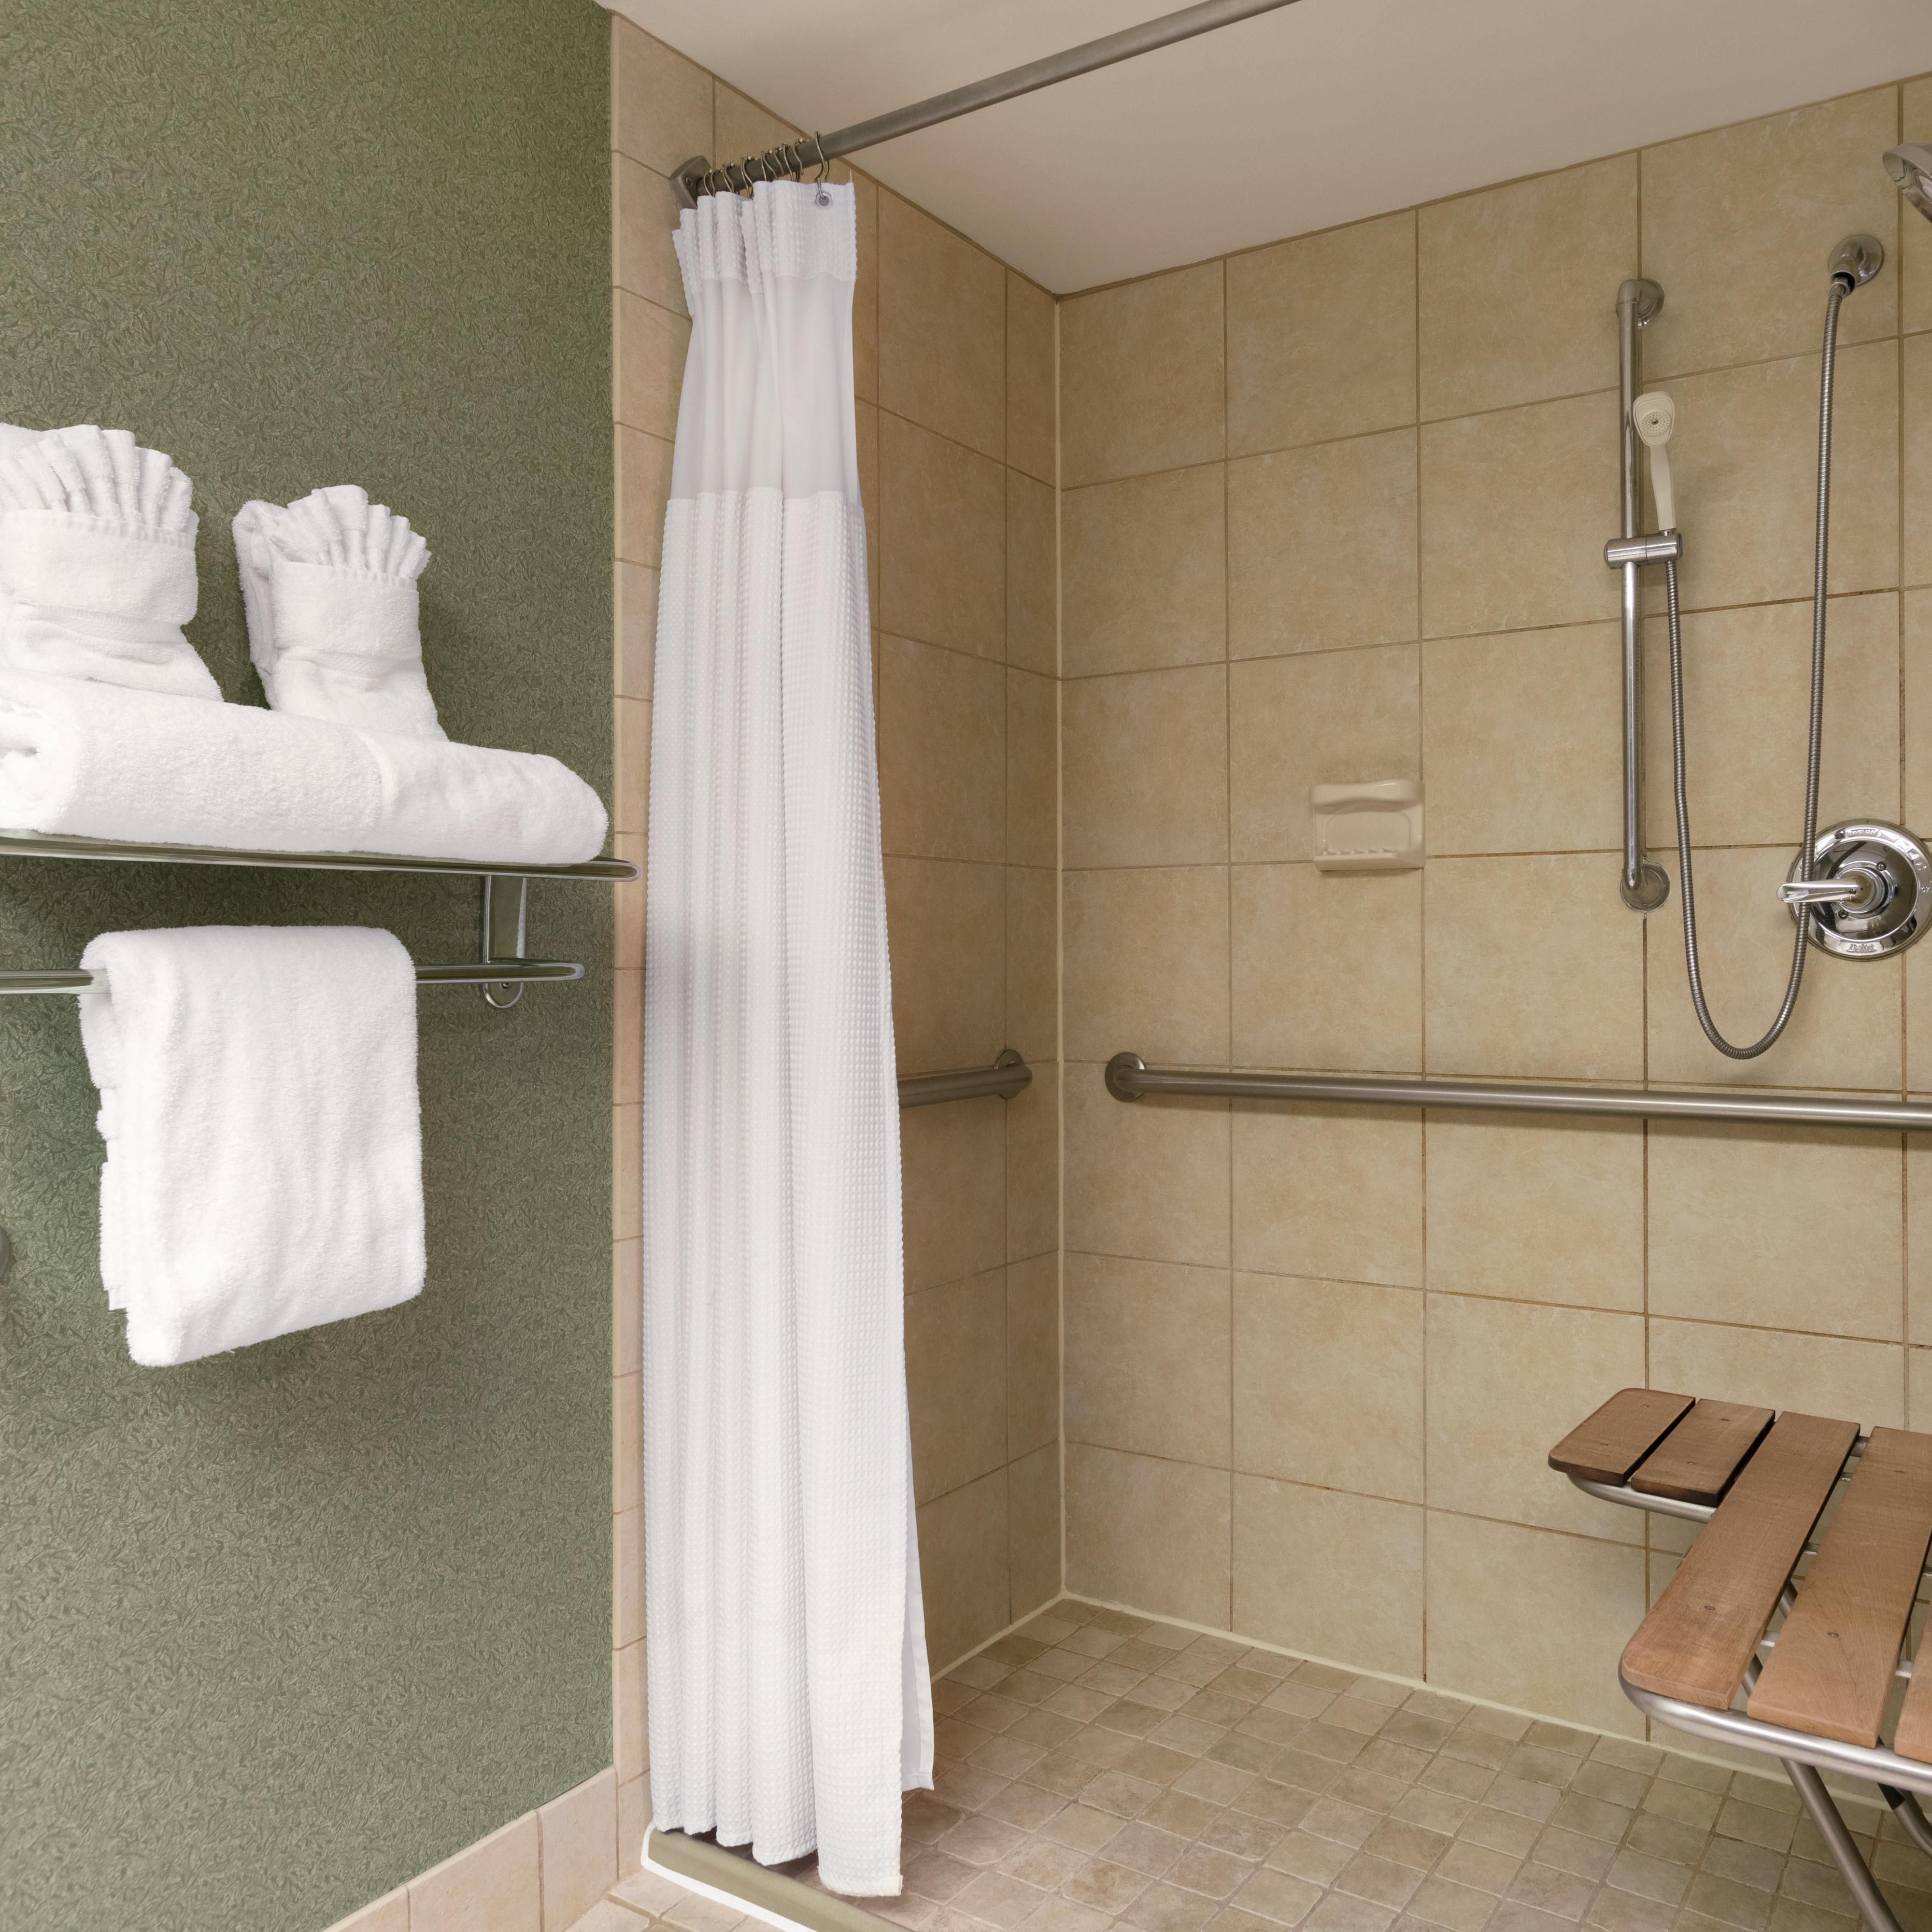 Guest rooms are available with accessible bathroom amenities.